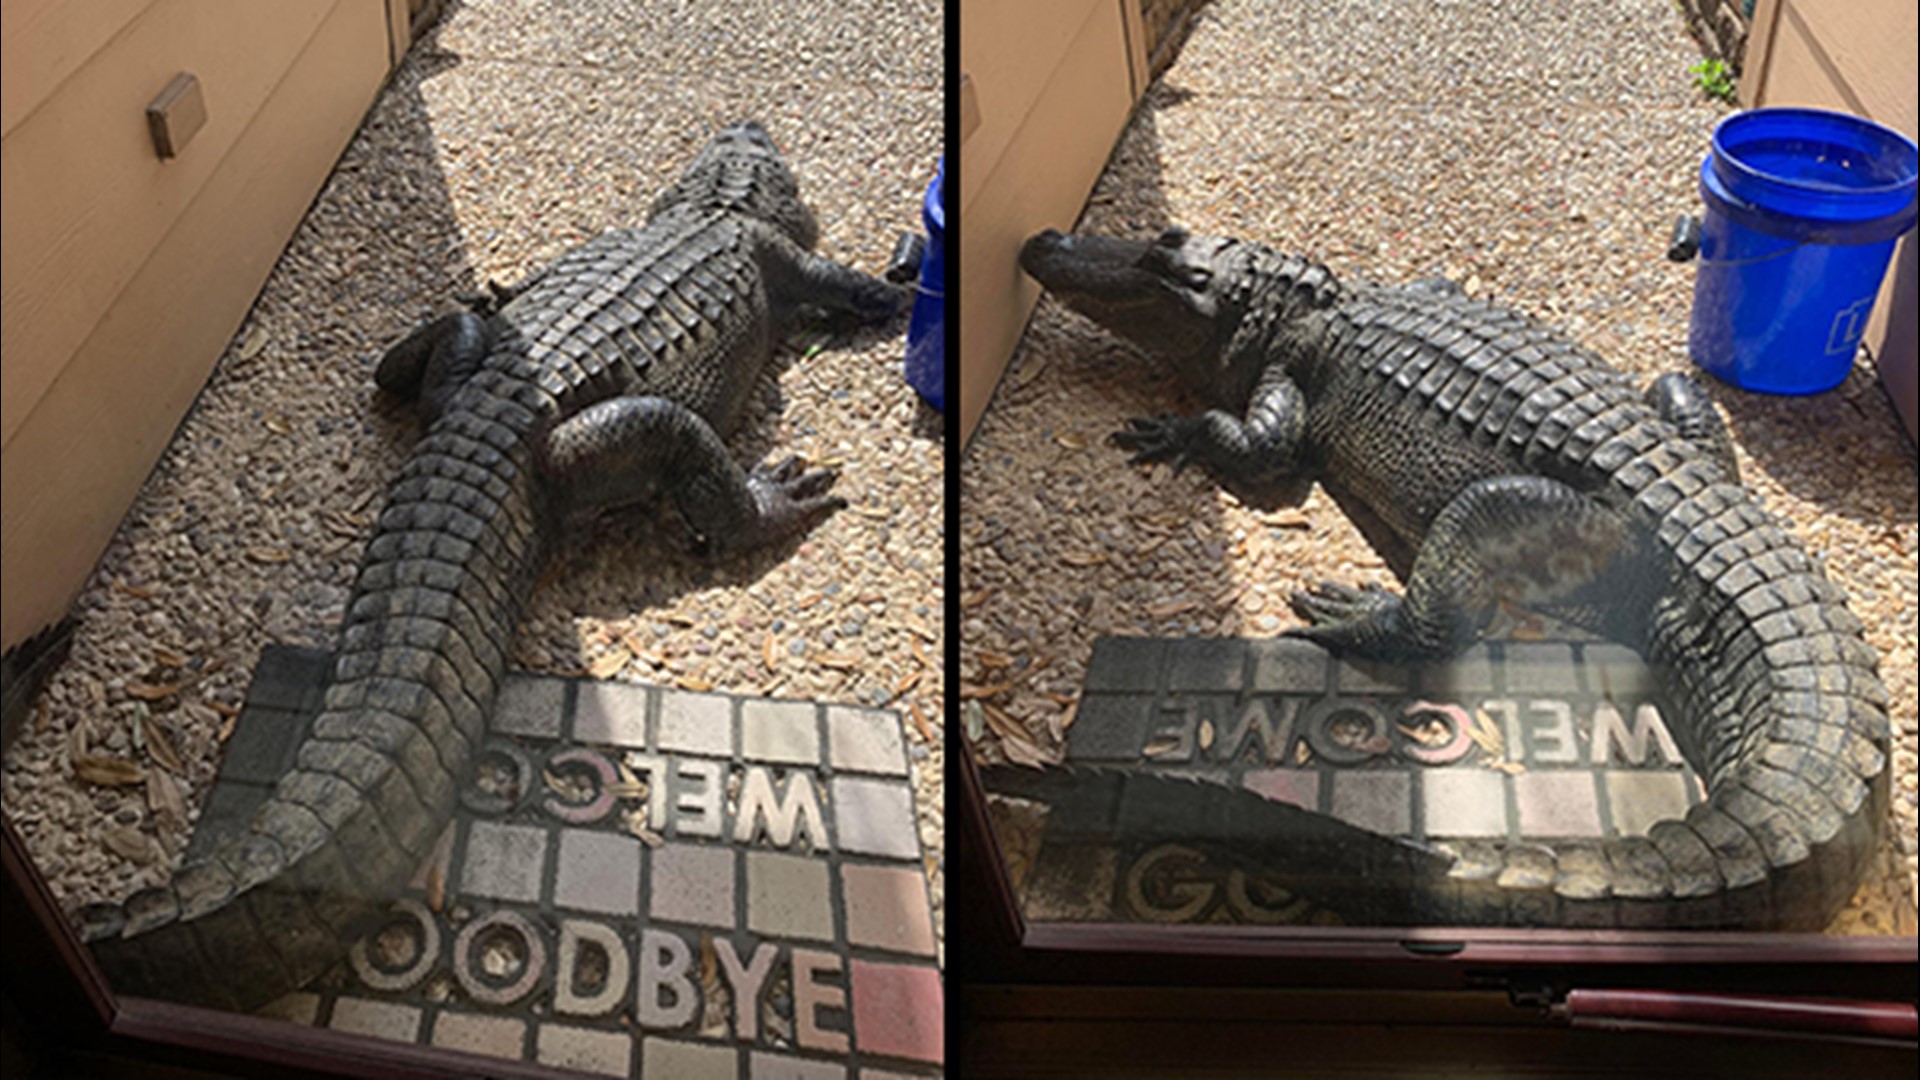 Imagine opening your front door to find a massive gator less than a step away!